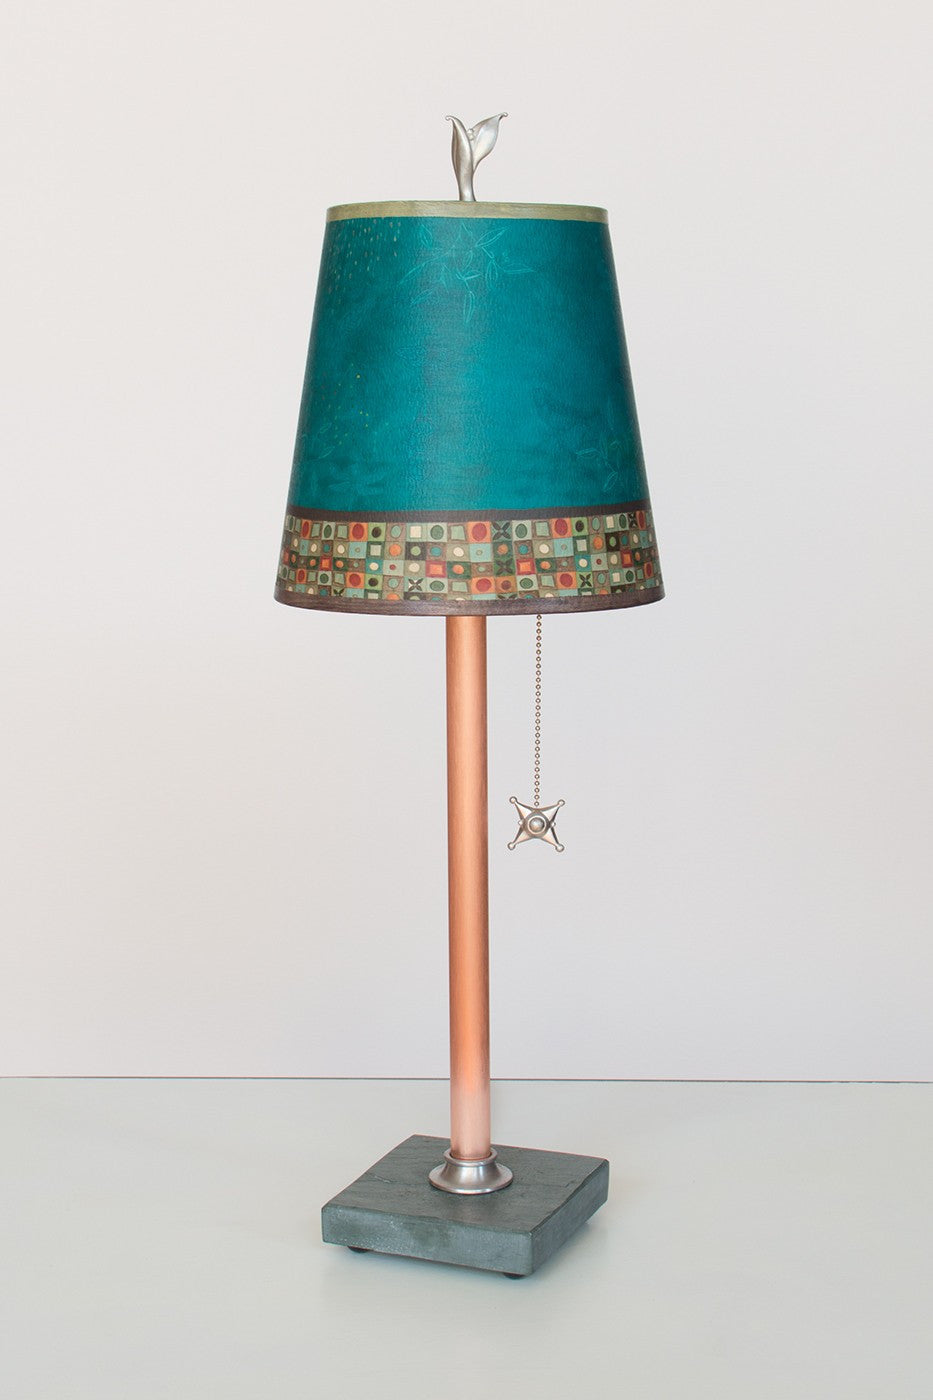 Copper Table Lamp with Small Drum Shade in Jade Mosaic - True North Gallery